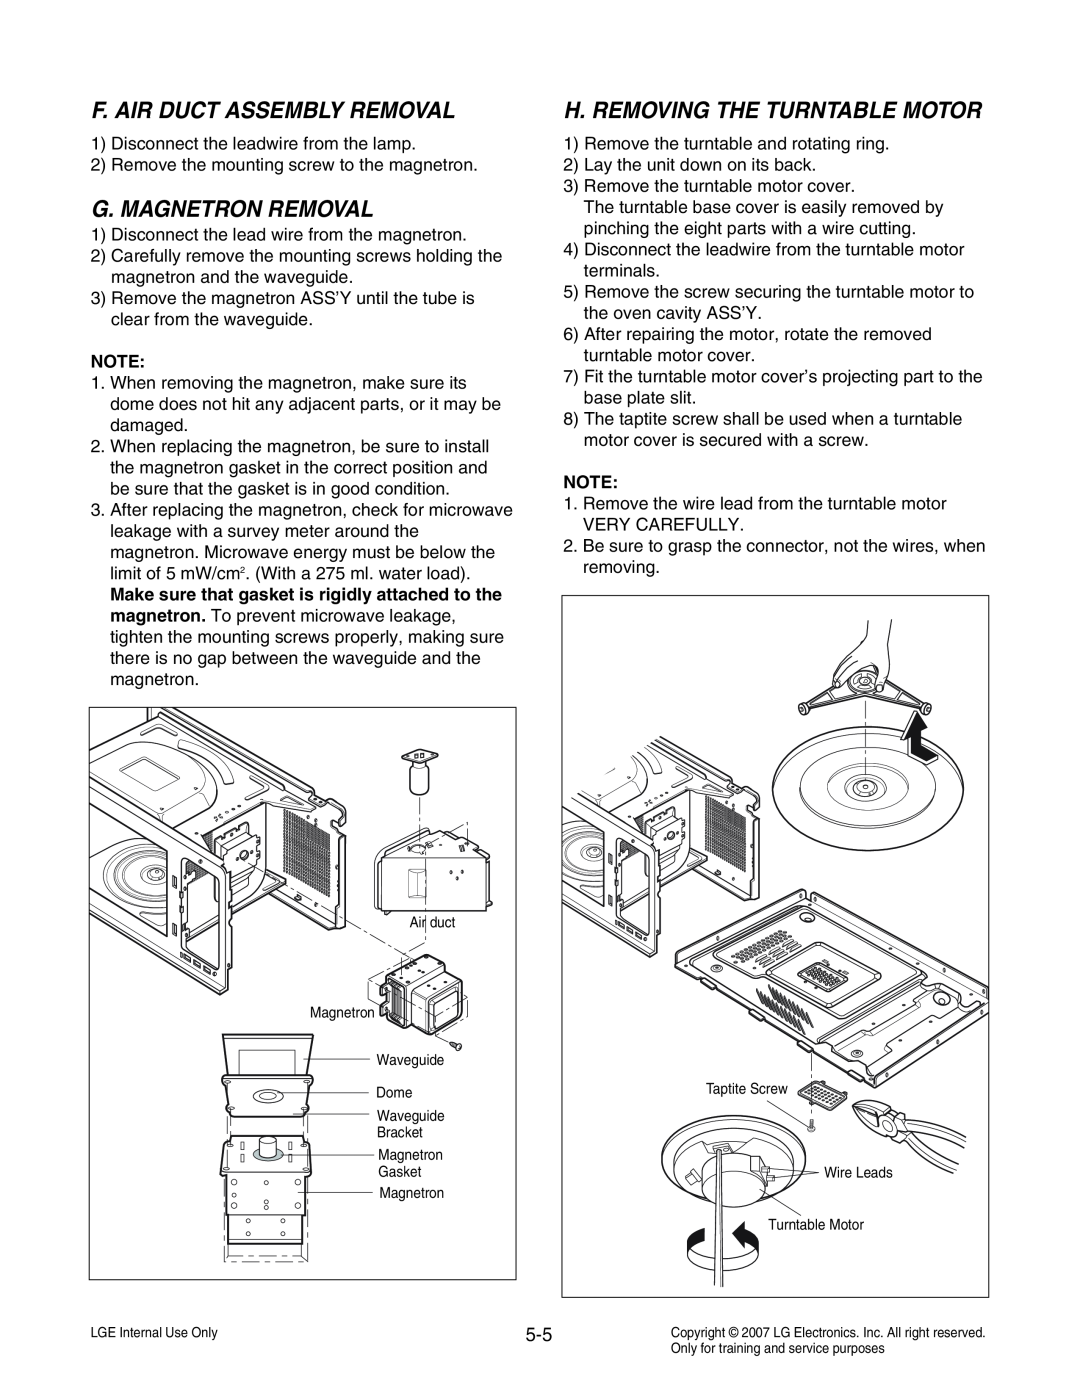 LG Electronics MS3447GRS F. Air Duct Assembly Removal, G. Magnetron Removal, H. Removing The Turntable Motor 